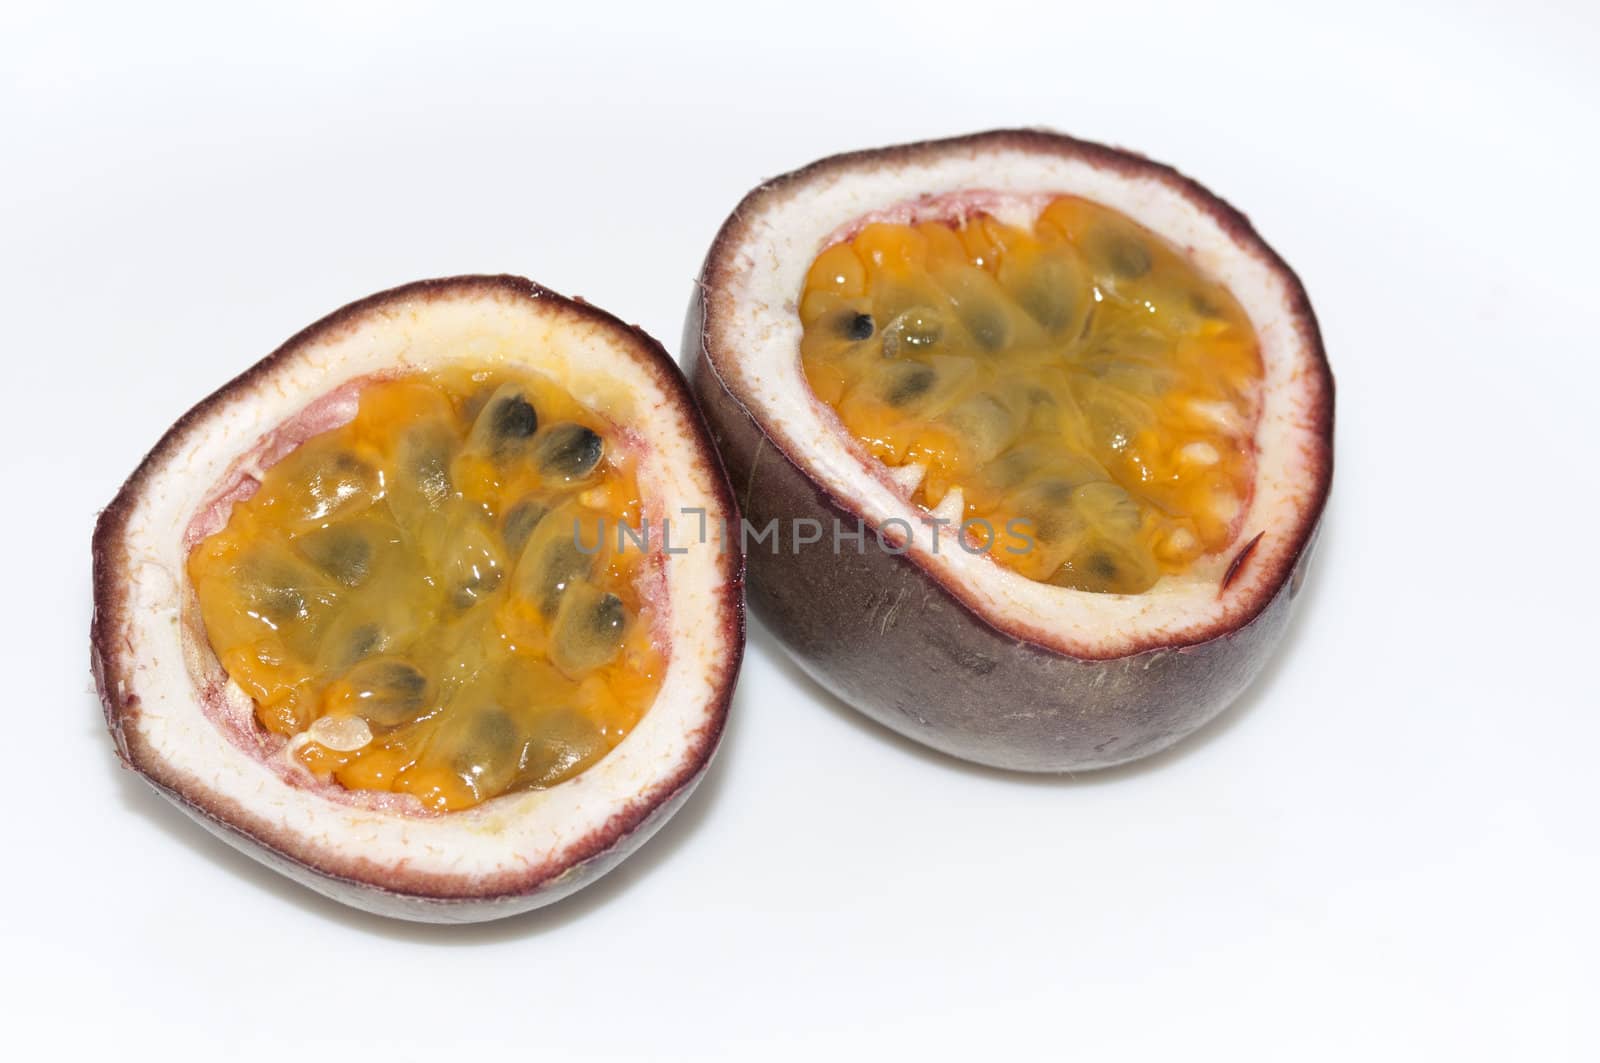 Passion fruit on white background by dred